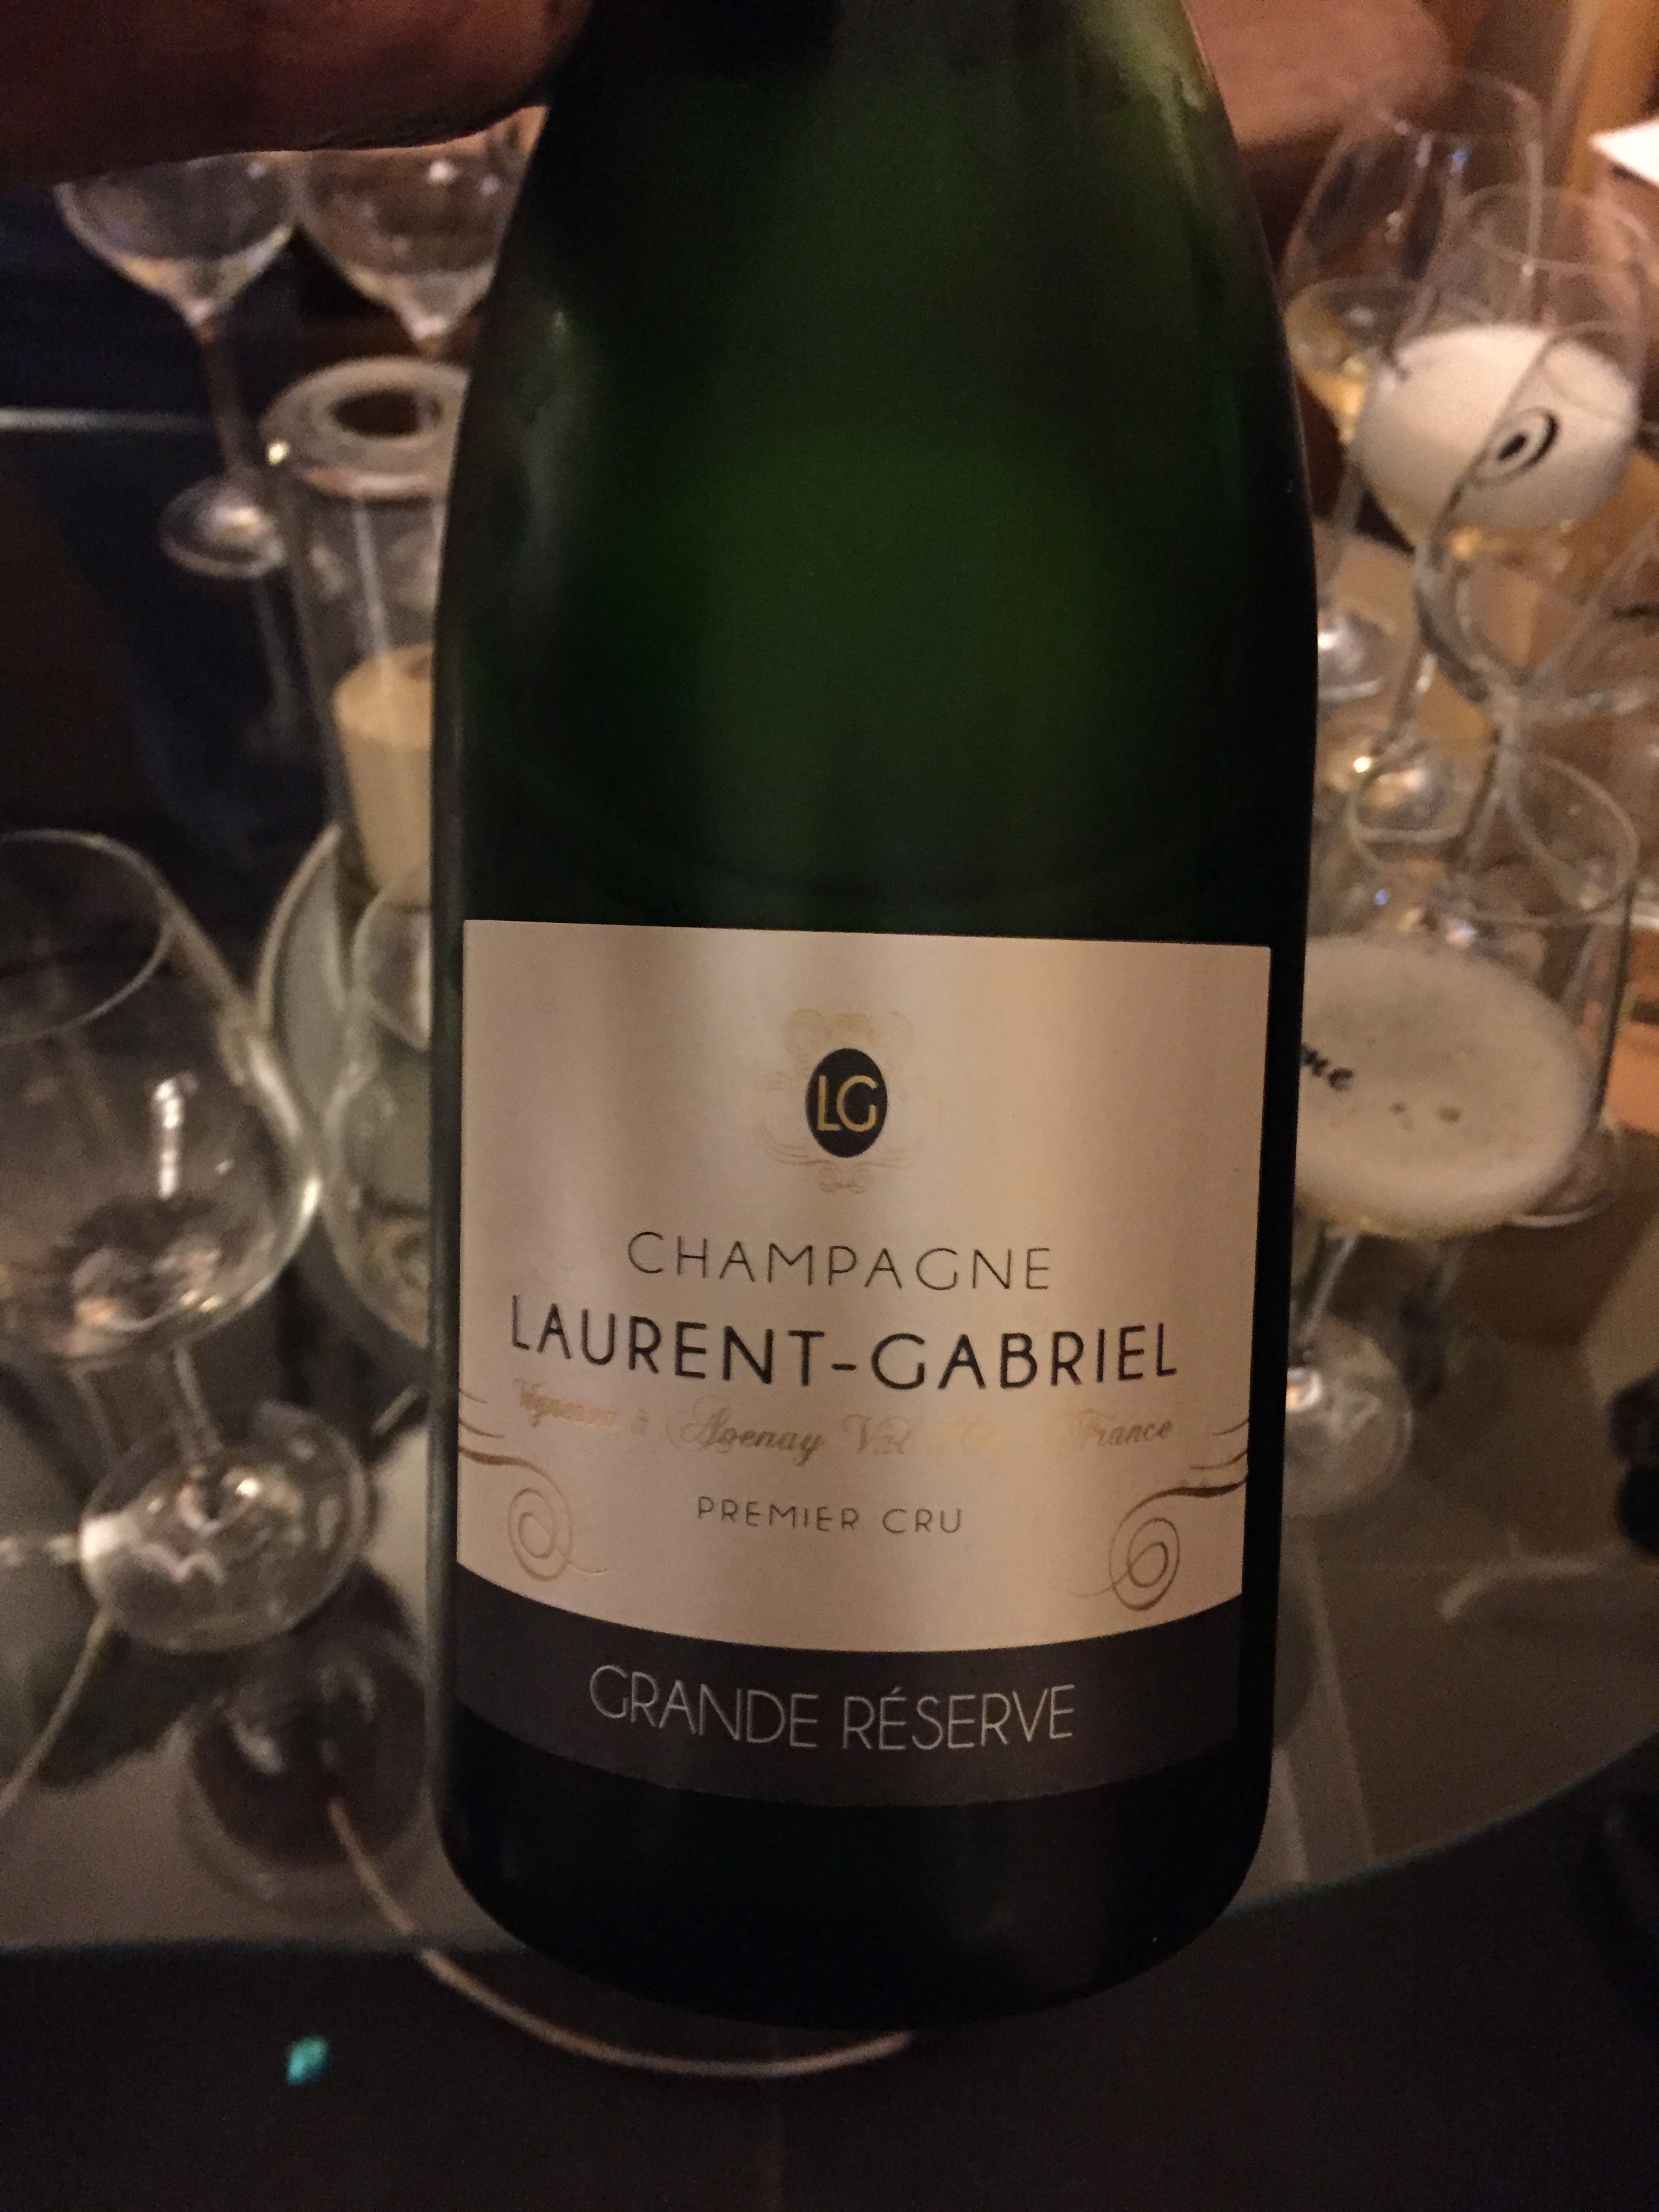 Small grower champagne for tasting